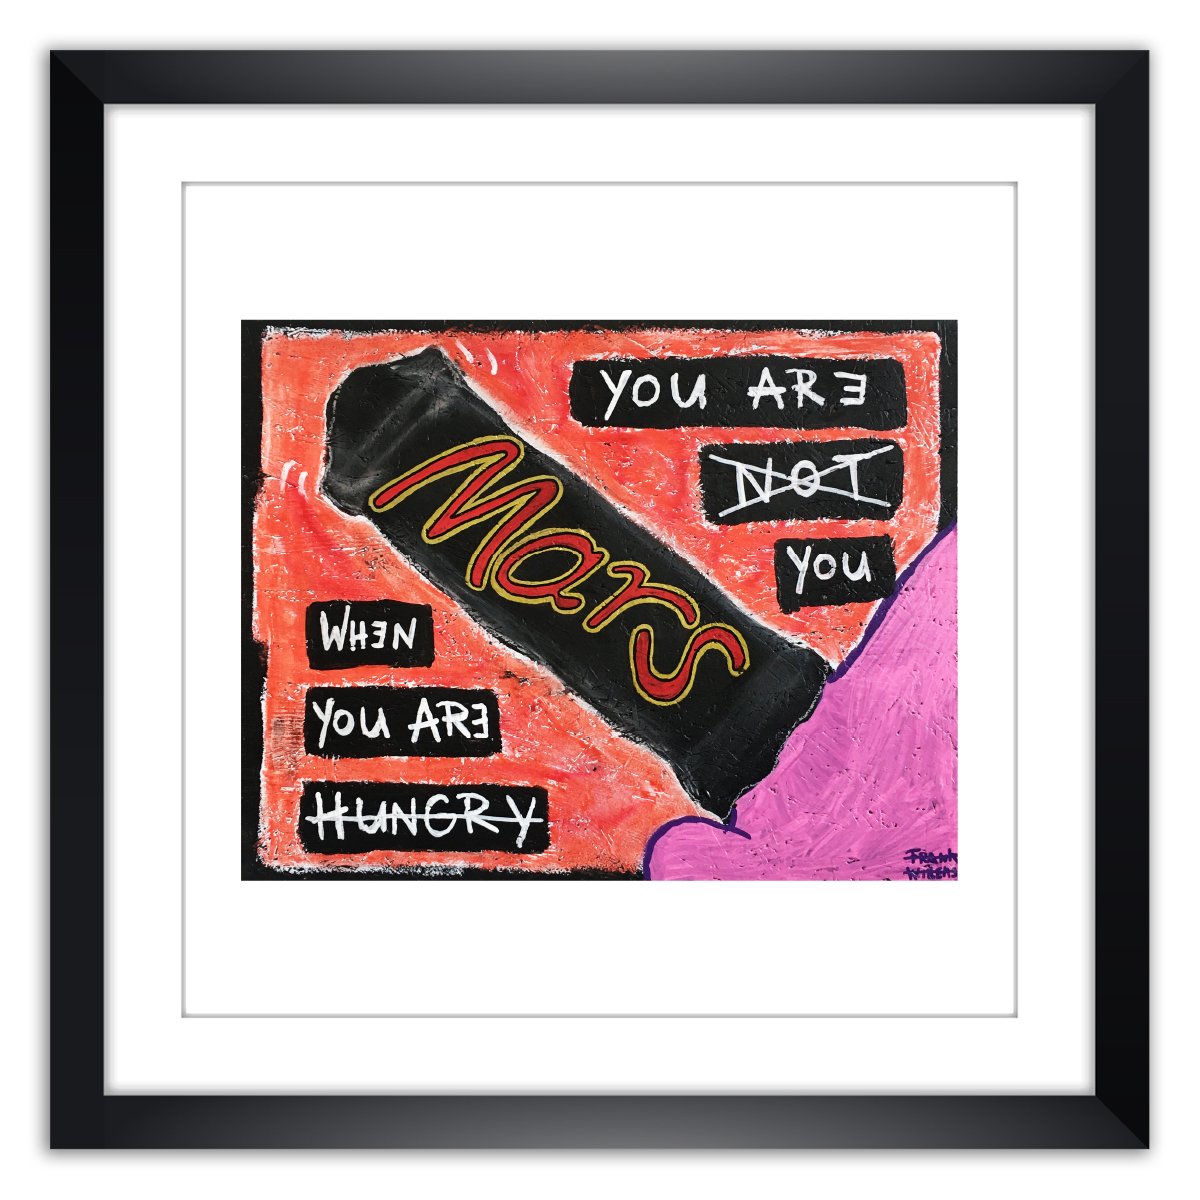 Limited prints - SNICKERS framed - Frank Willems